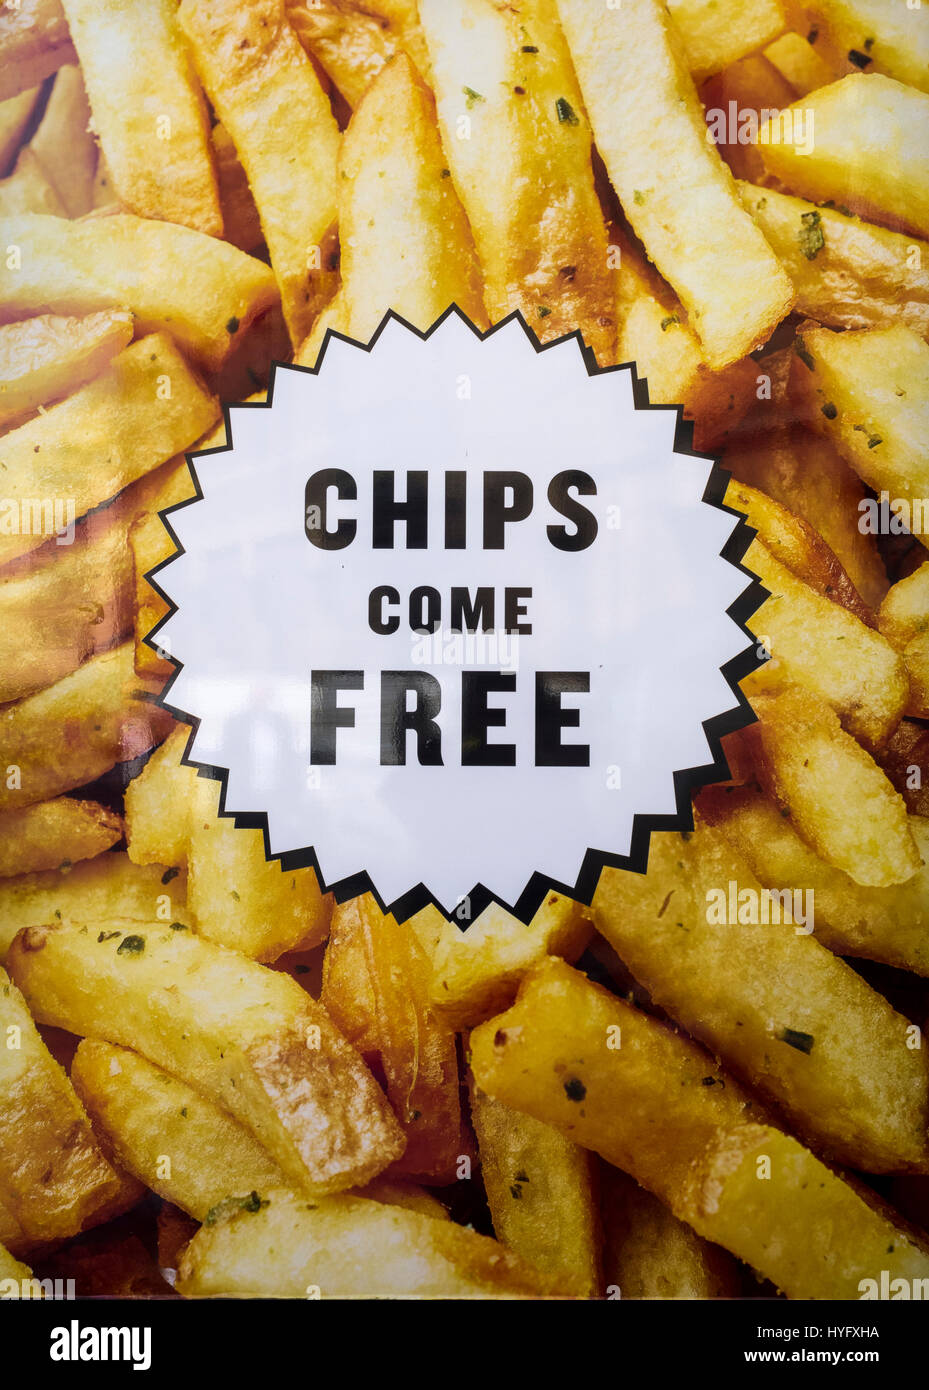 Advertising free chips with meals Stock Photo